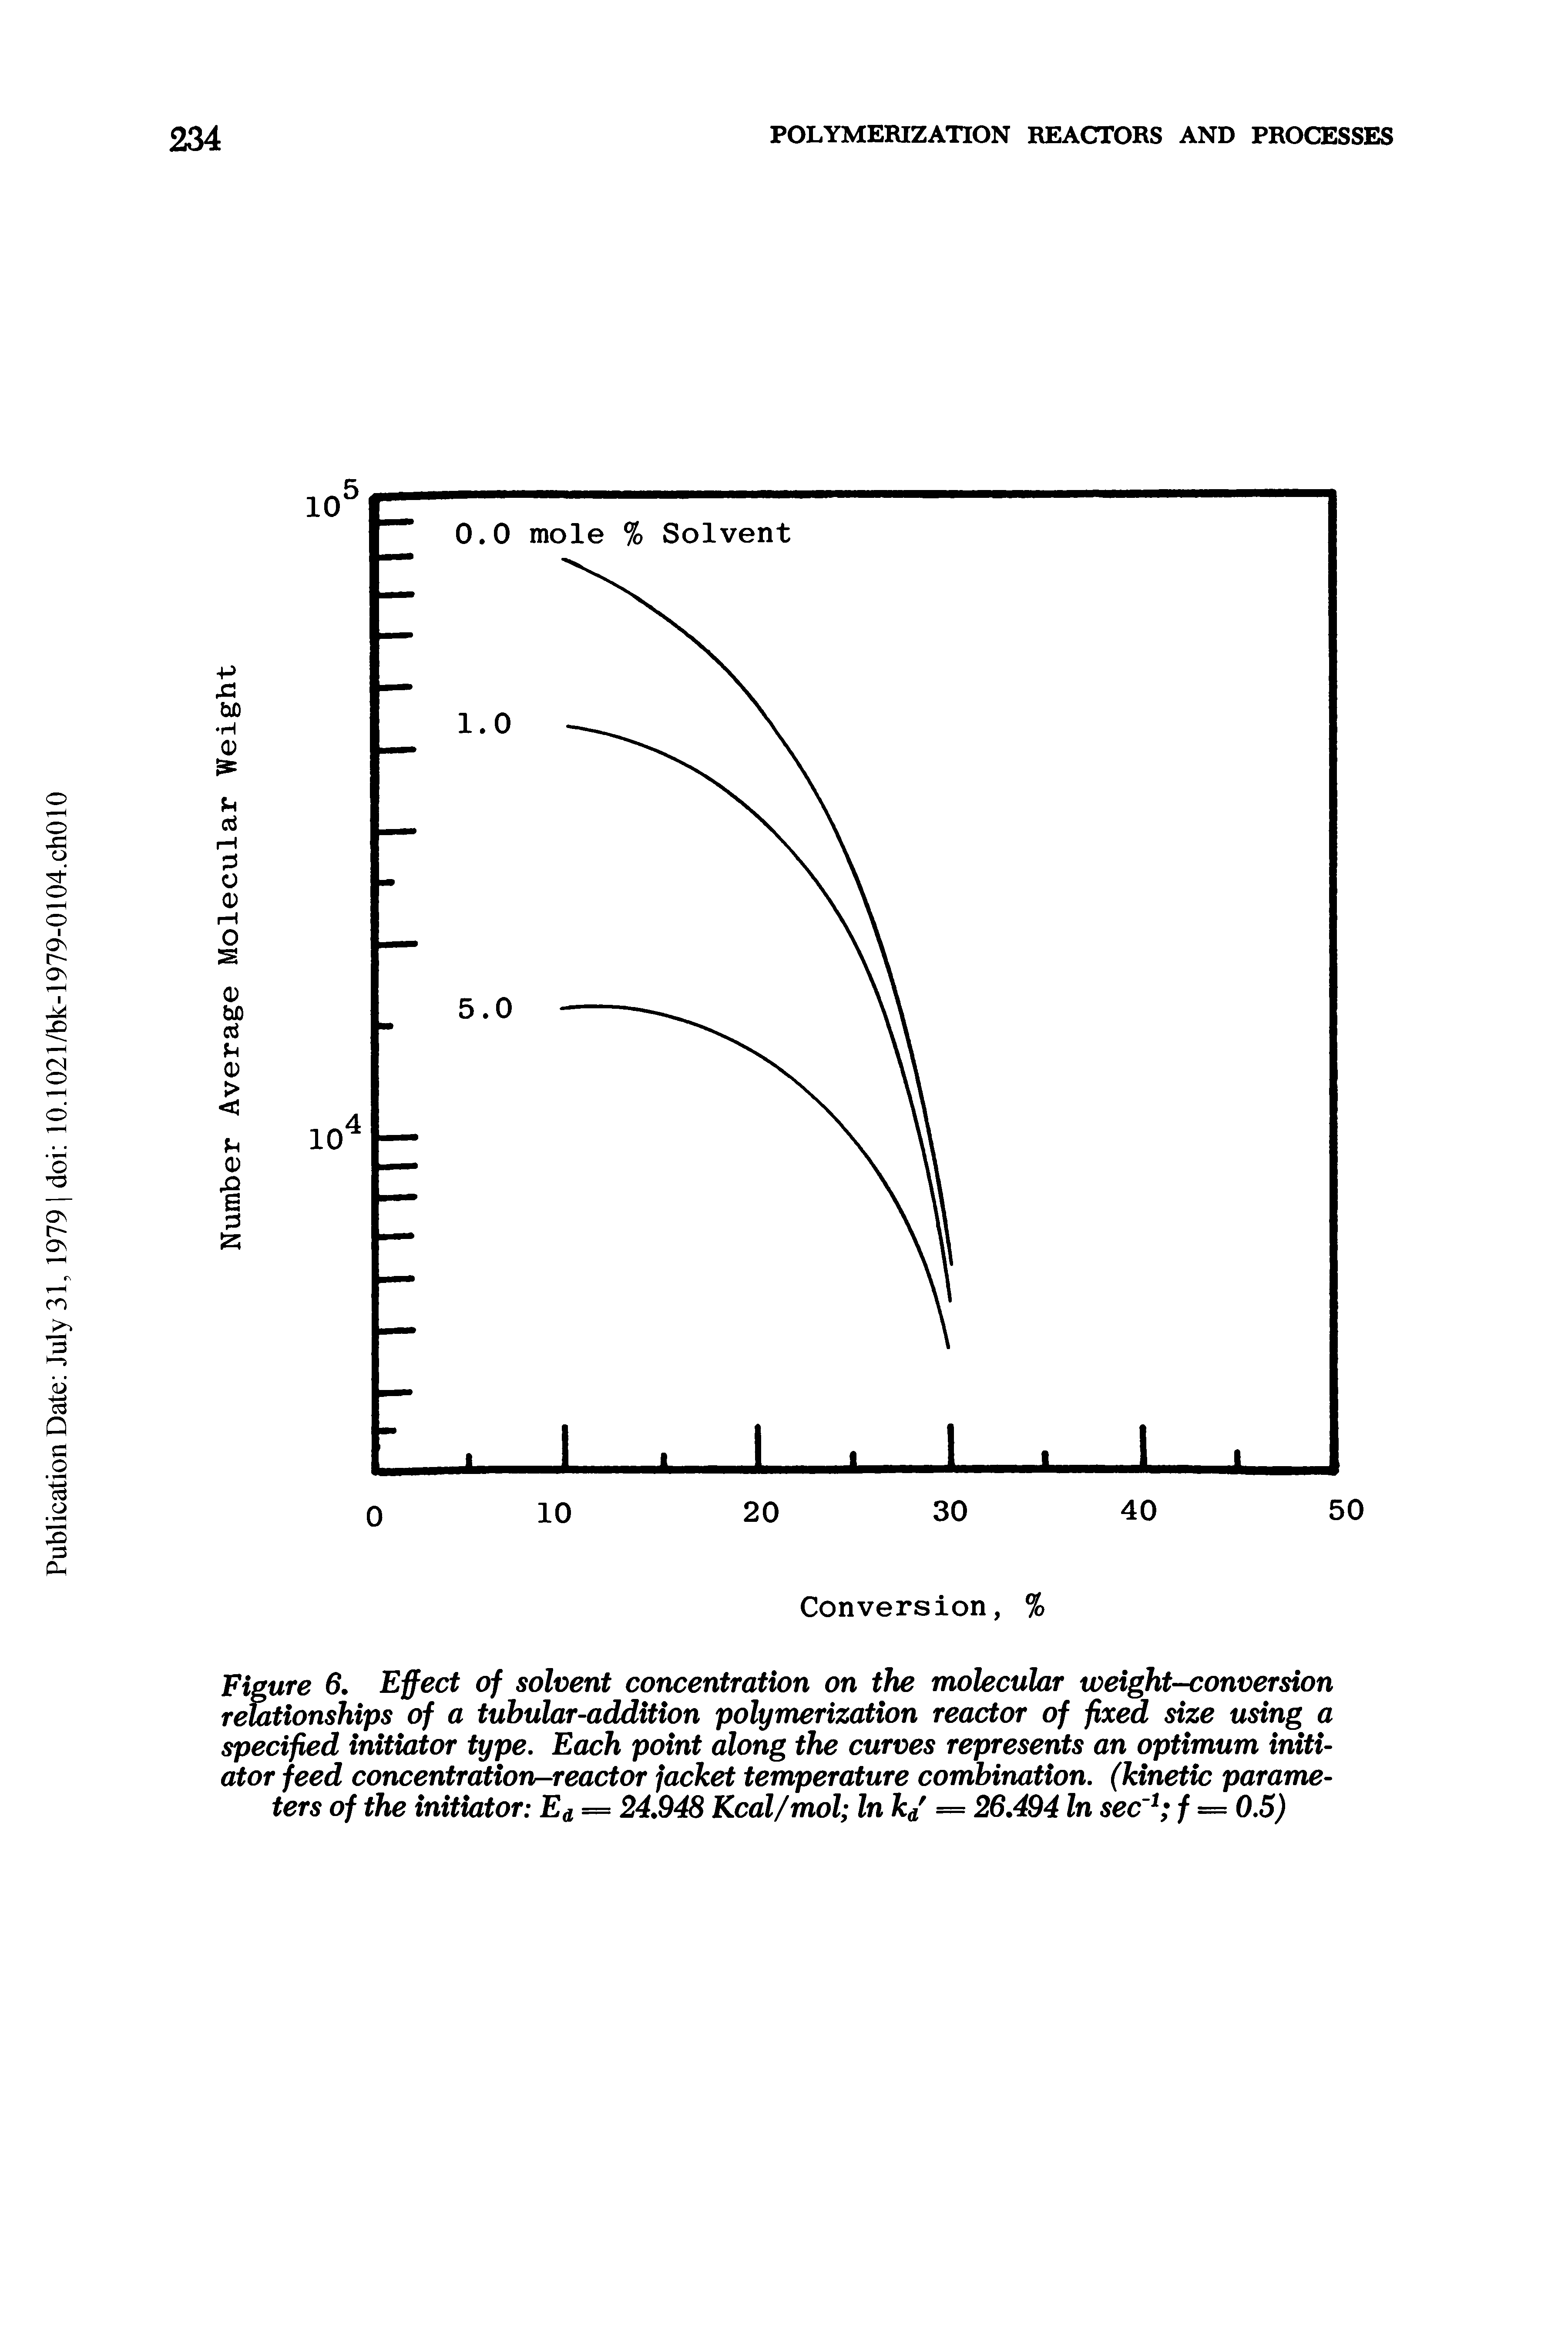 Figure 6, Ejfect of solvent concentration on the molecular weight-conversion rehtionships of a tubular-addition polymerization reactor of fix size using a specified initiator type. Each point along the curves represents an optimum initiator feed concentrationr-reactor jacket temperature combination, (kinetic parameters of the initiator Ea = 24,948 Kcal/mol In k/ = 26,494 In sec f = 0.5)...